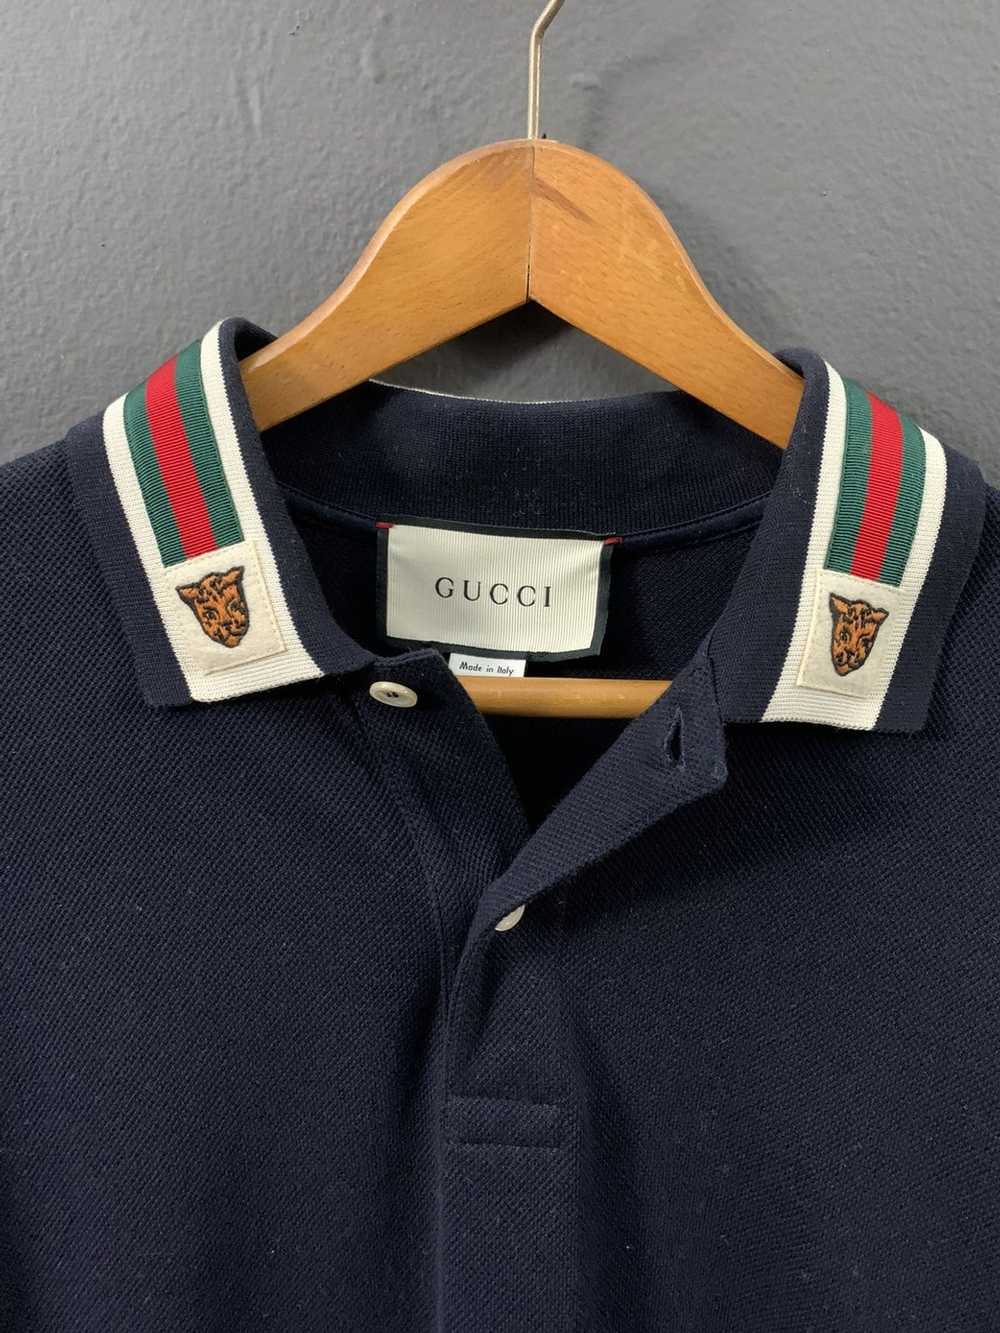 Gucci Navy Gucci Polo with embroidered Lion - image 3